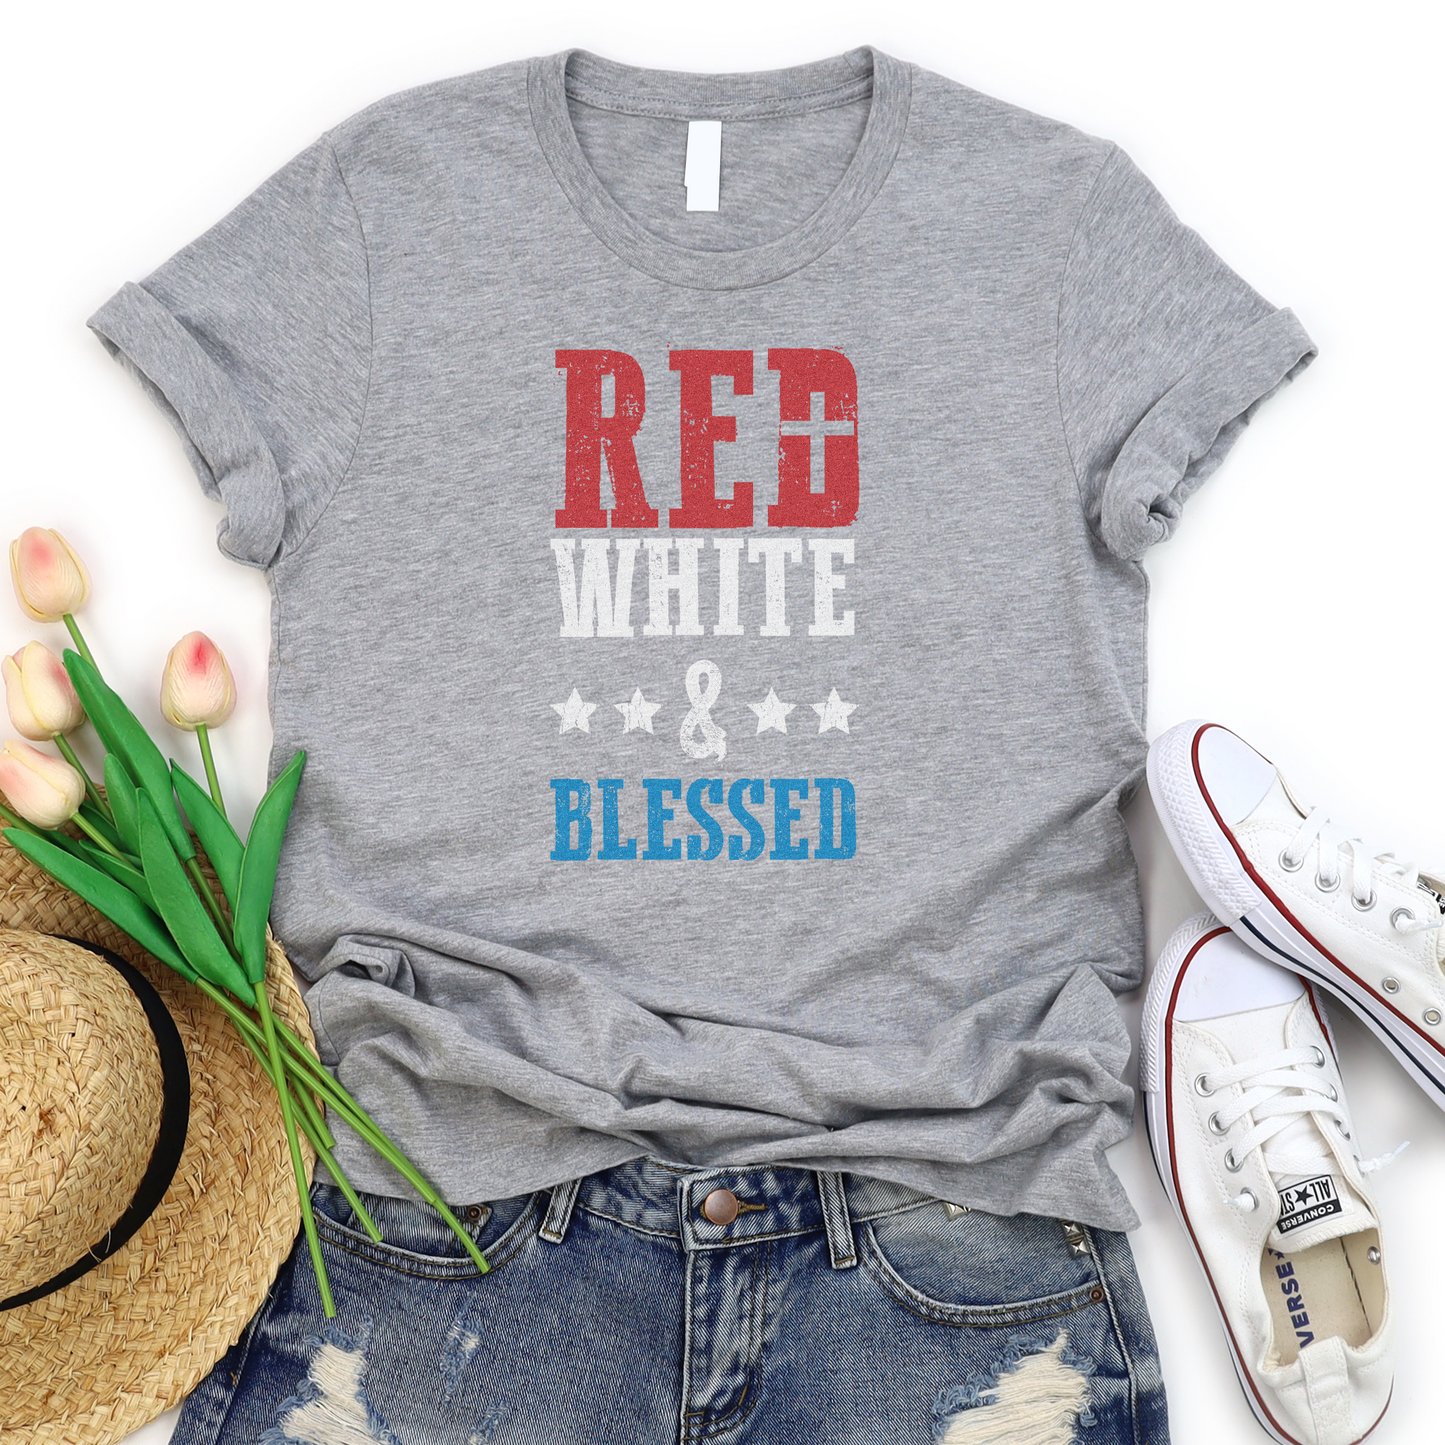 Red White & Blessed T-shirt